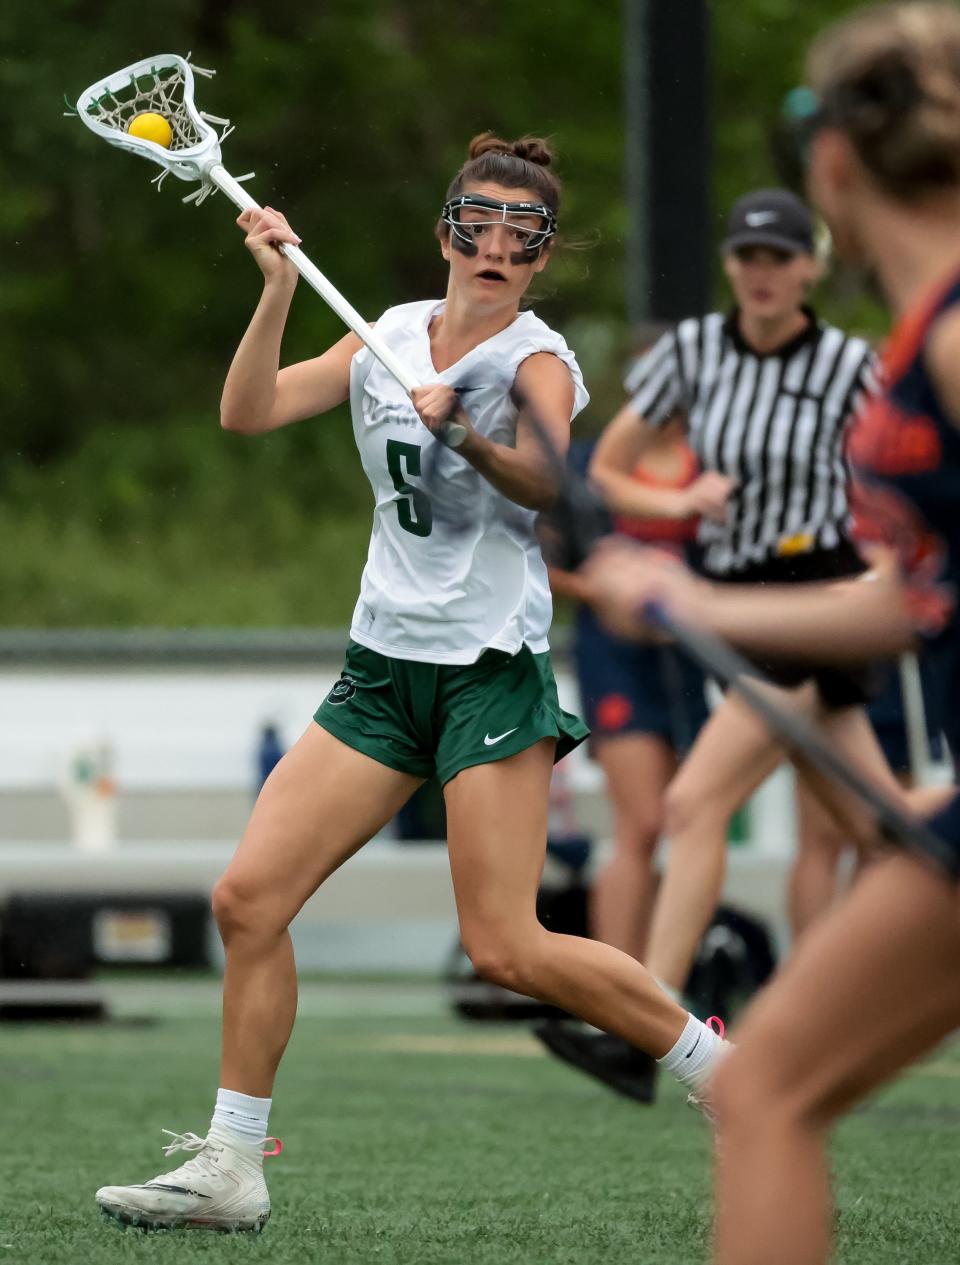 Olympus and Brighton compete in a 5A girls lacrosse semifinal game at Westminster College in Salt Lake City on Tuesday, May 23, 2023. | Spenser Heaps, Deseret News